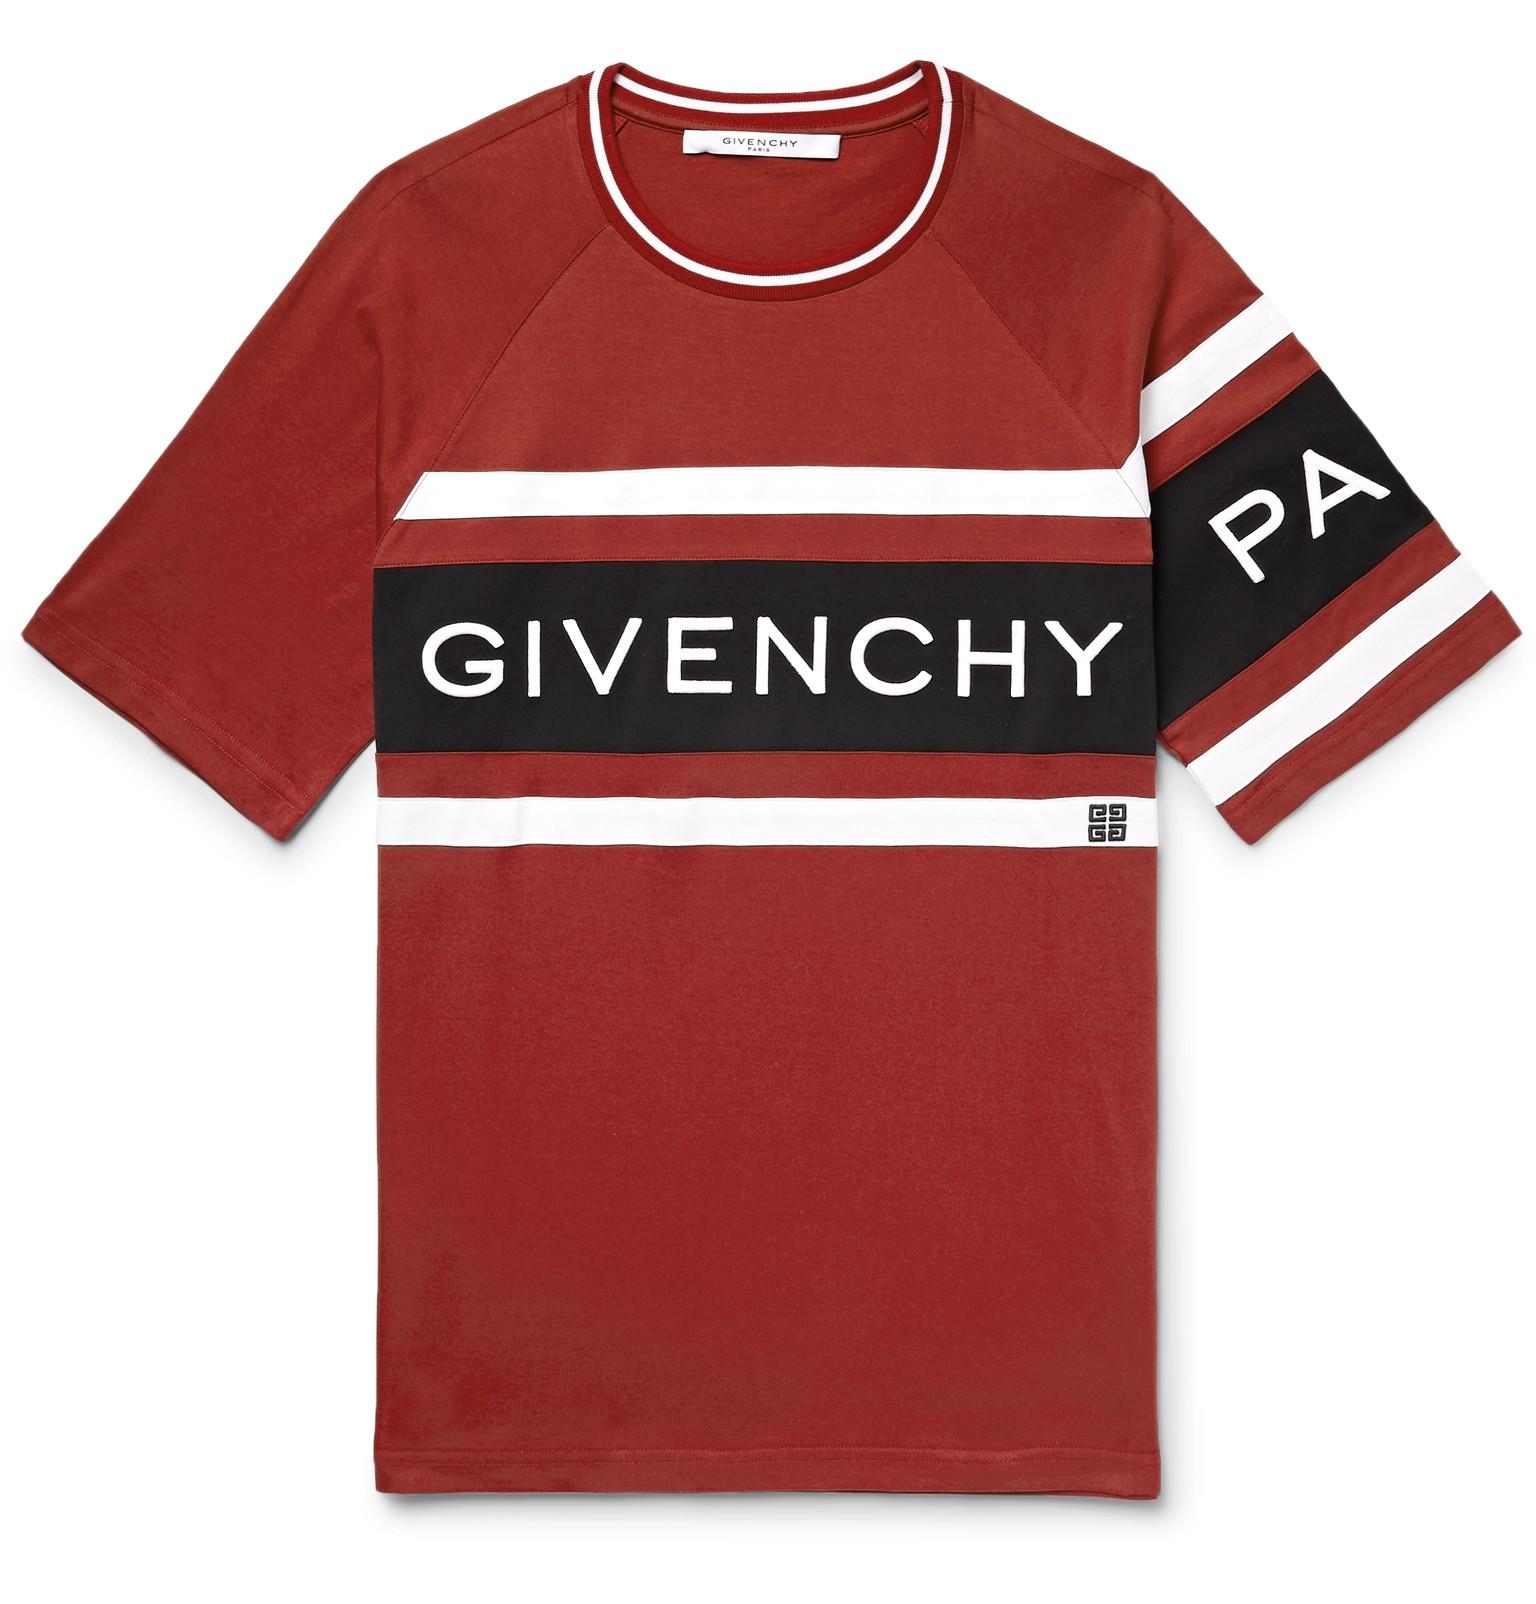 Givenchy Cotton Logo Colour-block T-shirt in Red for Men - Lyst